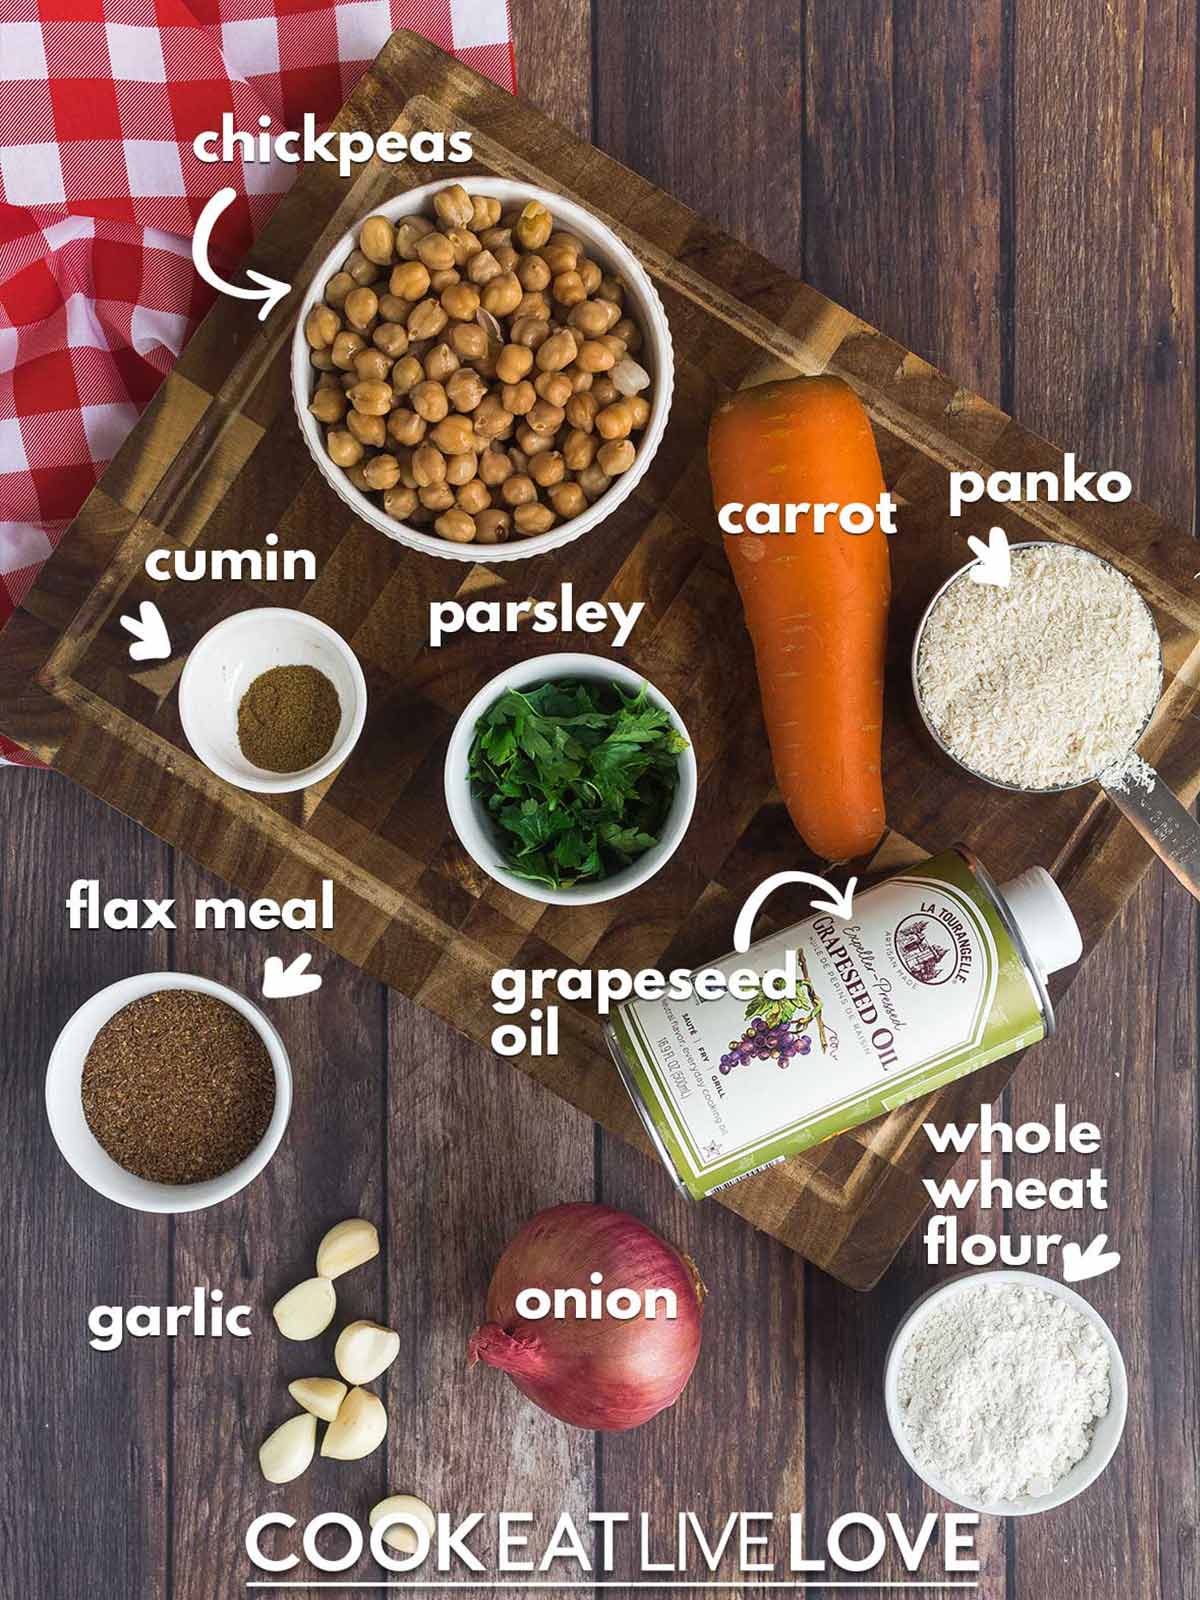 Ingredients to make vegan chickpea burgers on the table with text labels